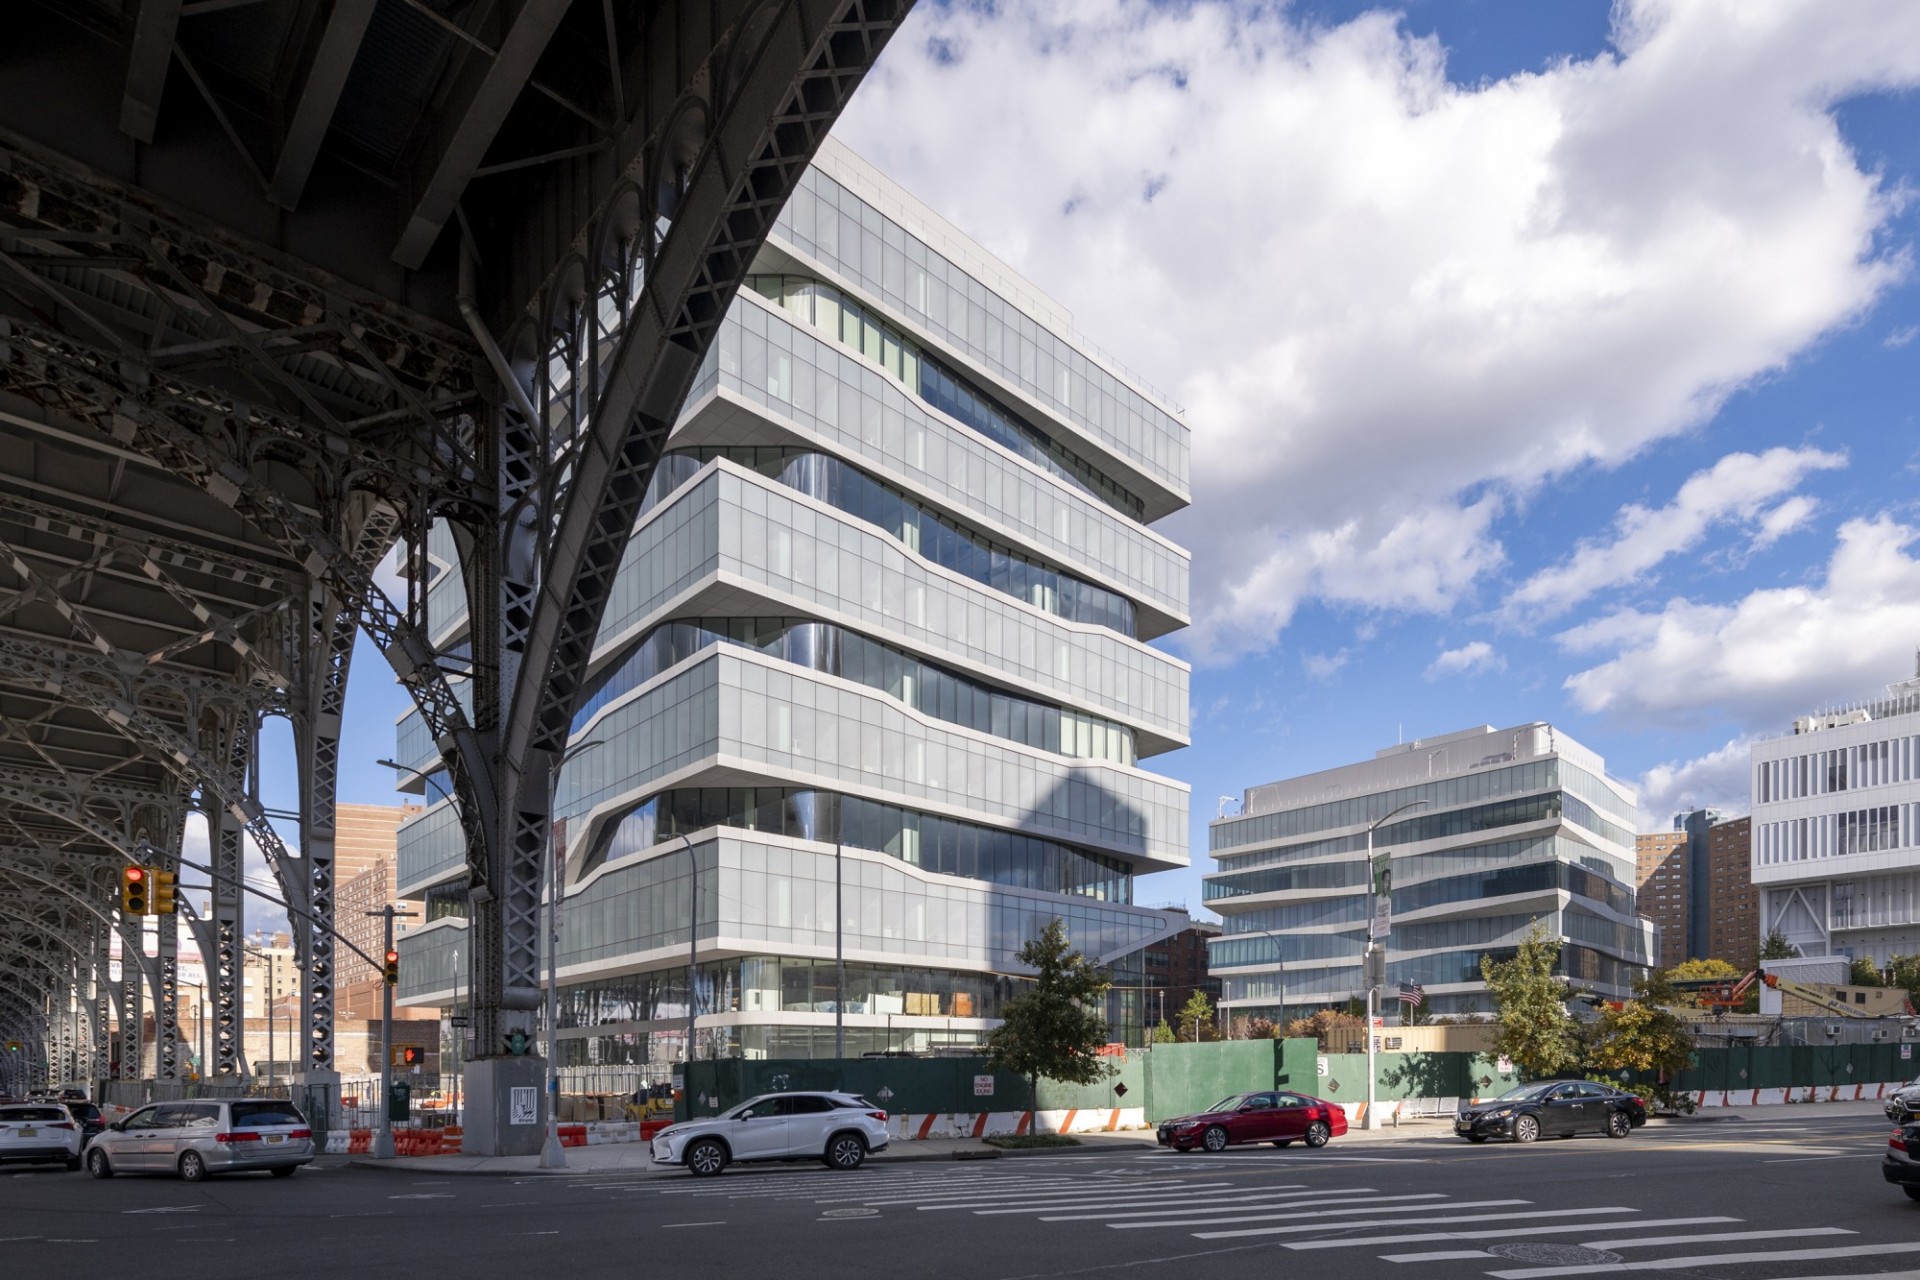 A view of the completed Columbia Business School buildings from across the street, underneath the viaduct.